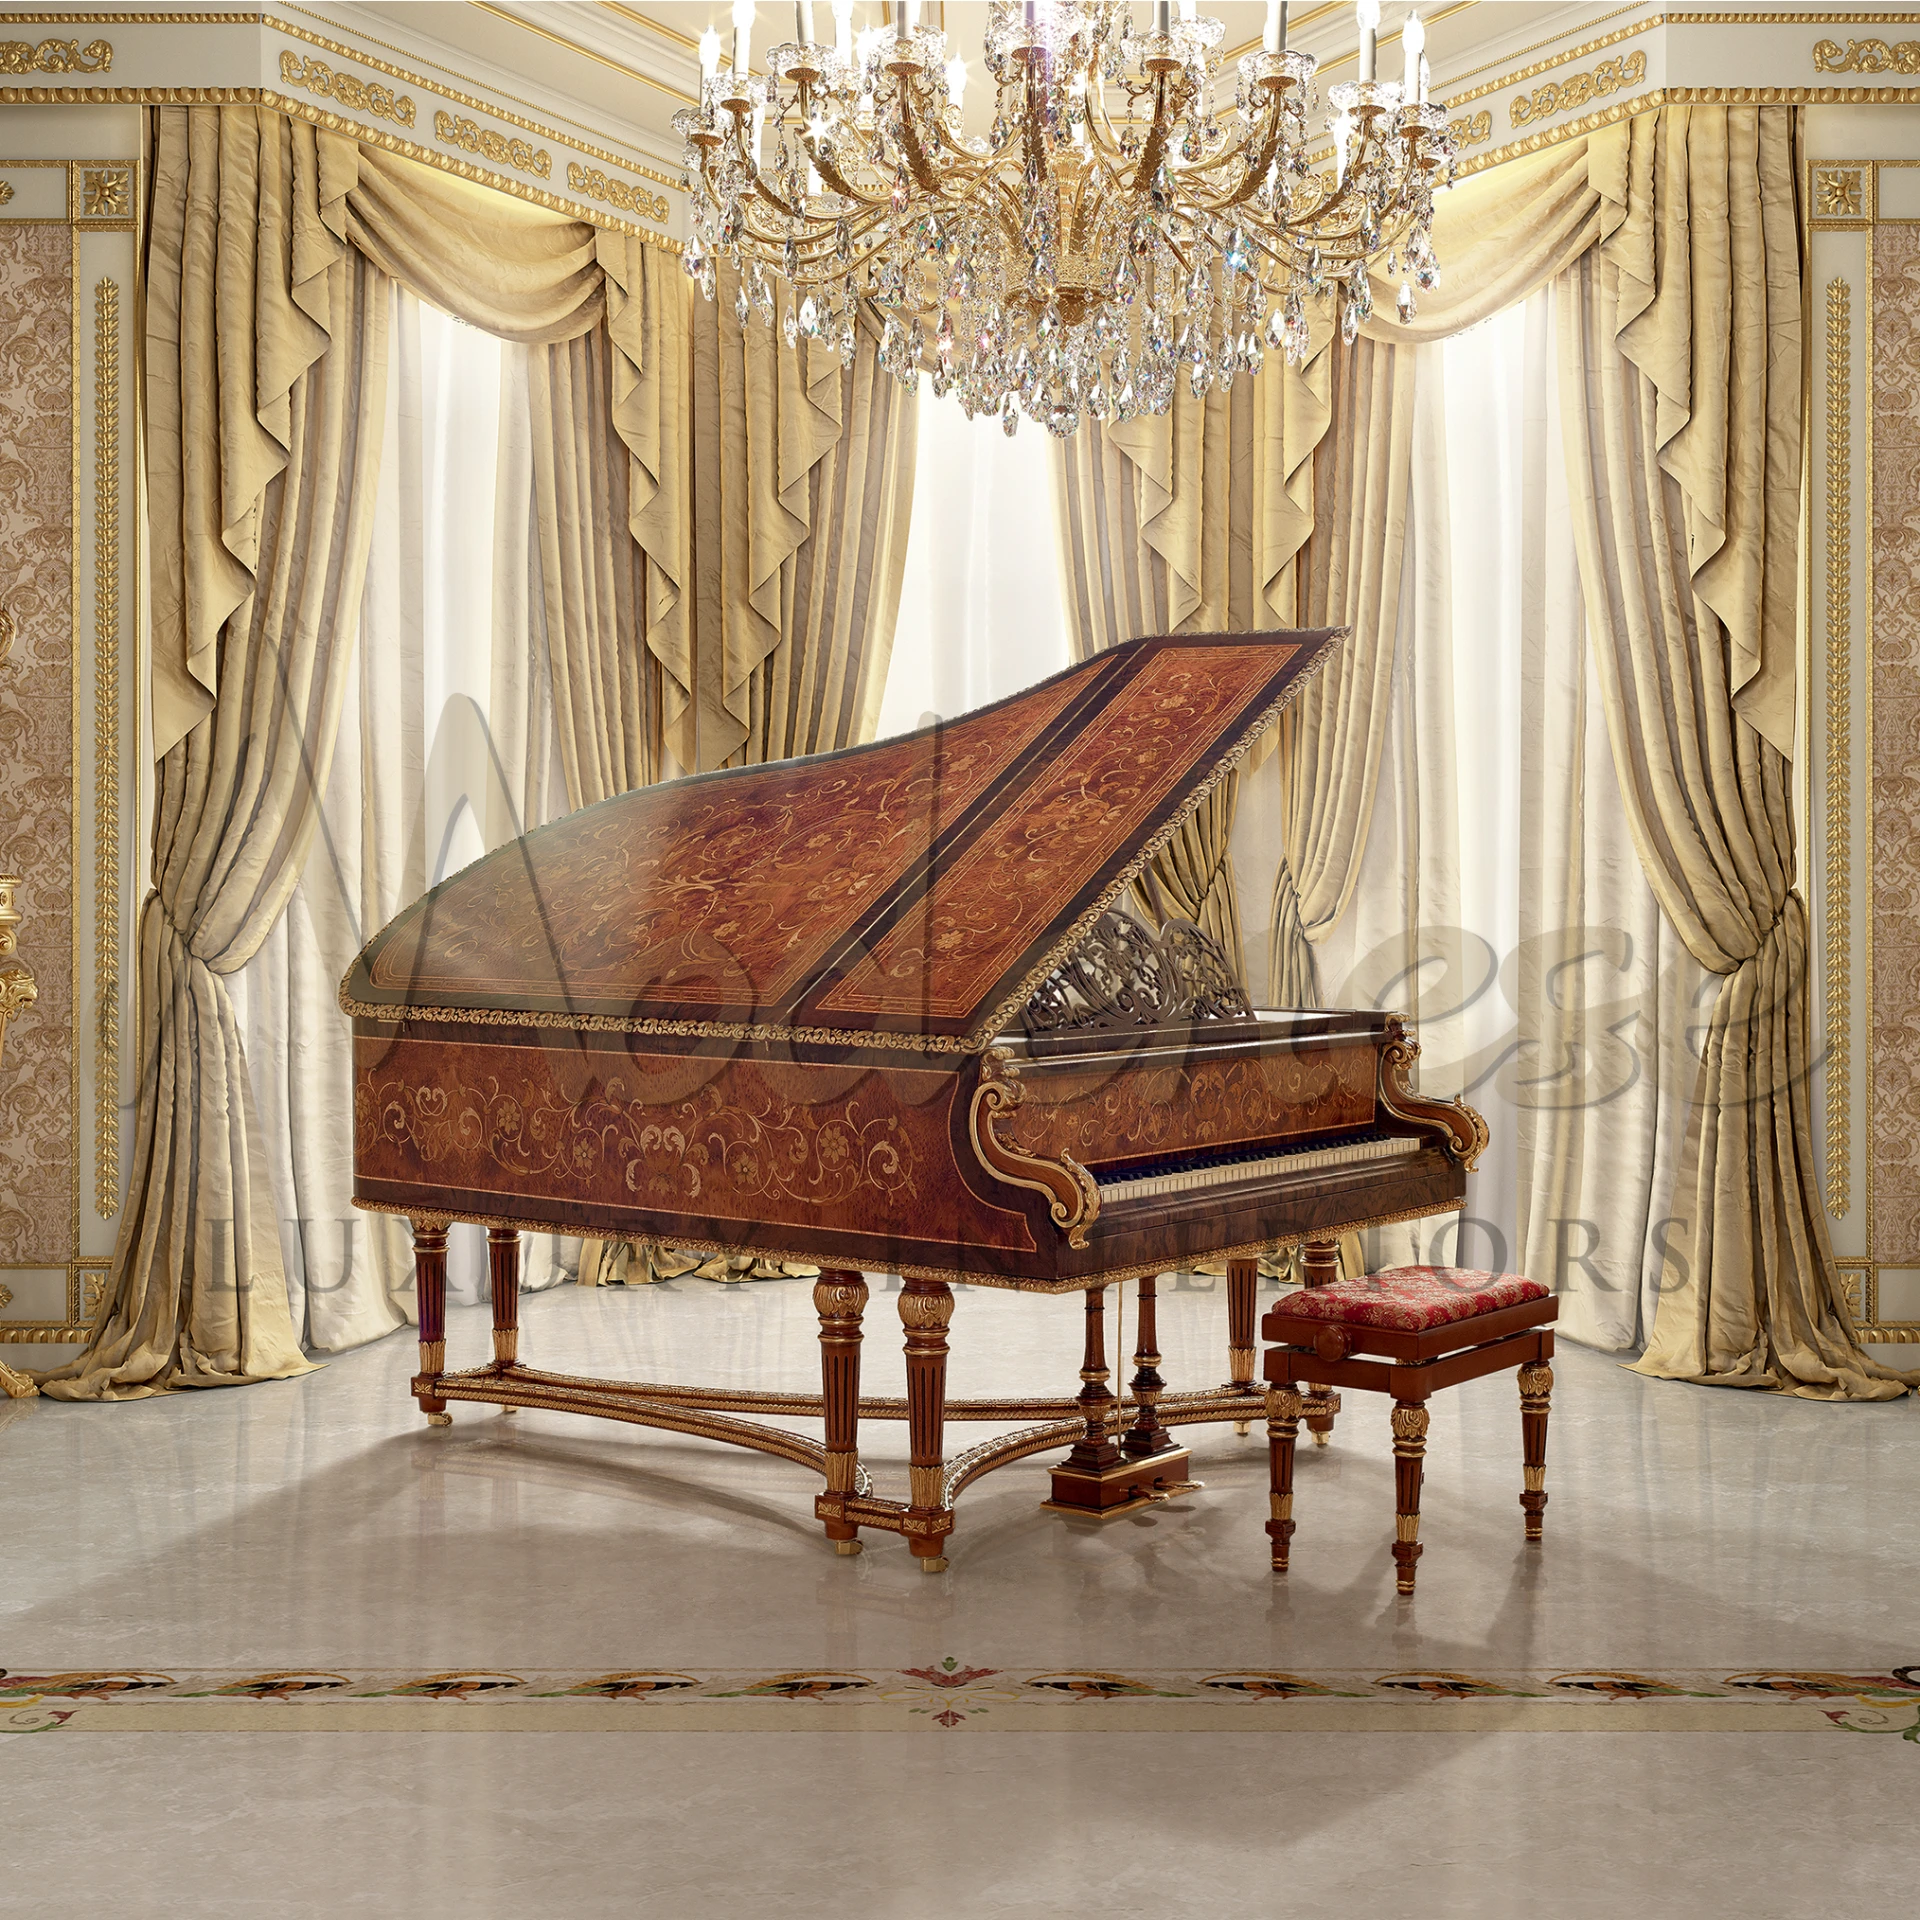 Royal Piano with gold-plated hardware, embodying luxury villa design with exquisite ivory keys and hand-carved details.